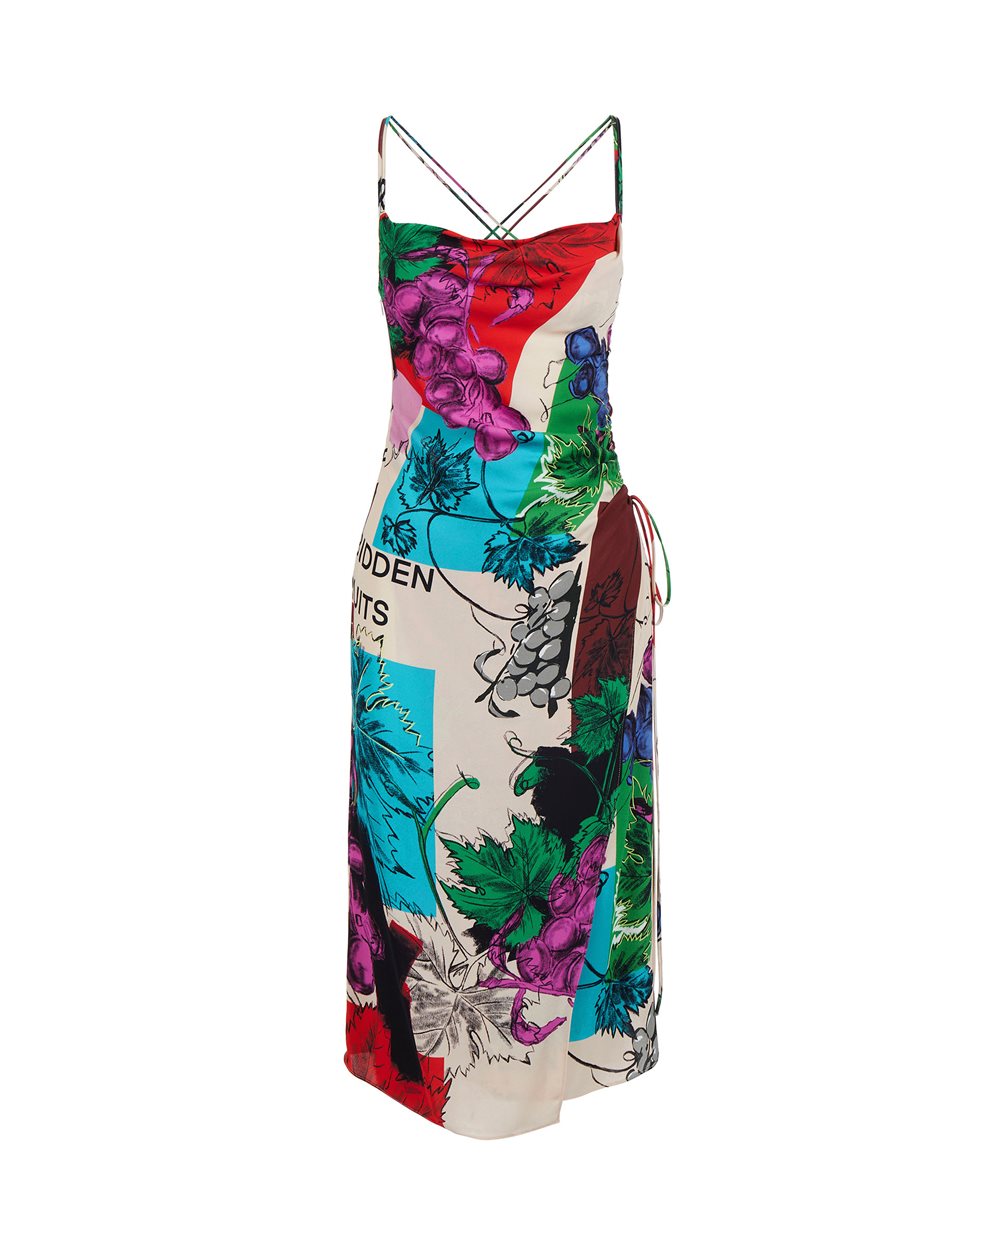 Dress with Forbidden Fruit print and logo - VALENTINE'S DAY GIFTS | Iceberg - Official Website